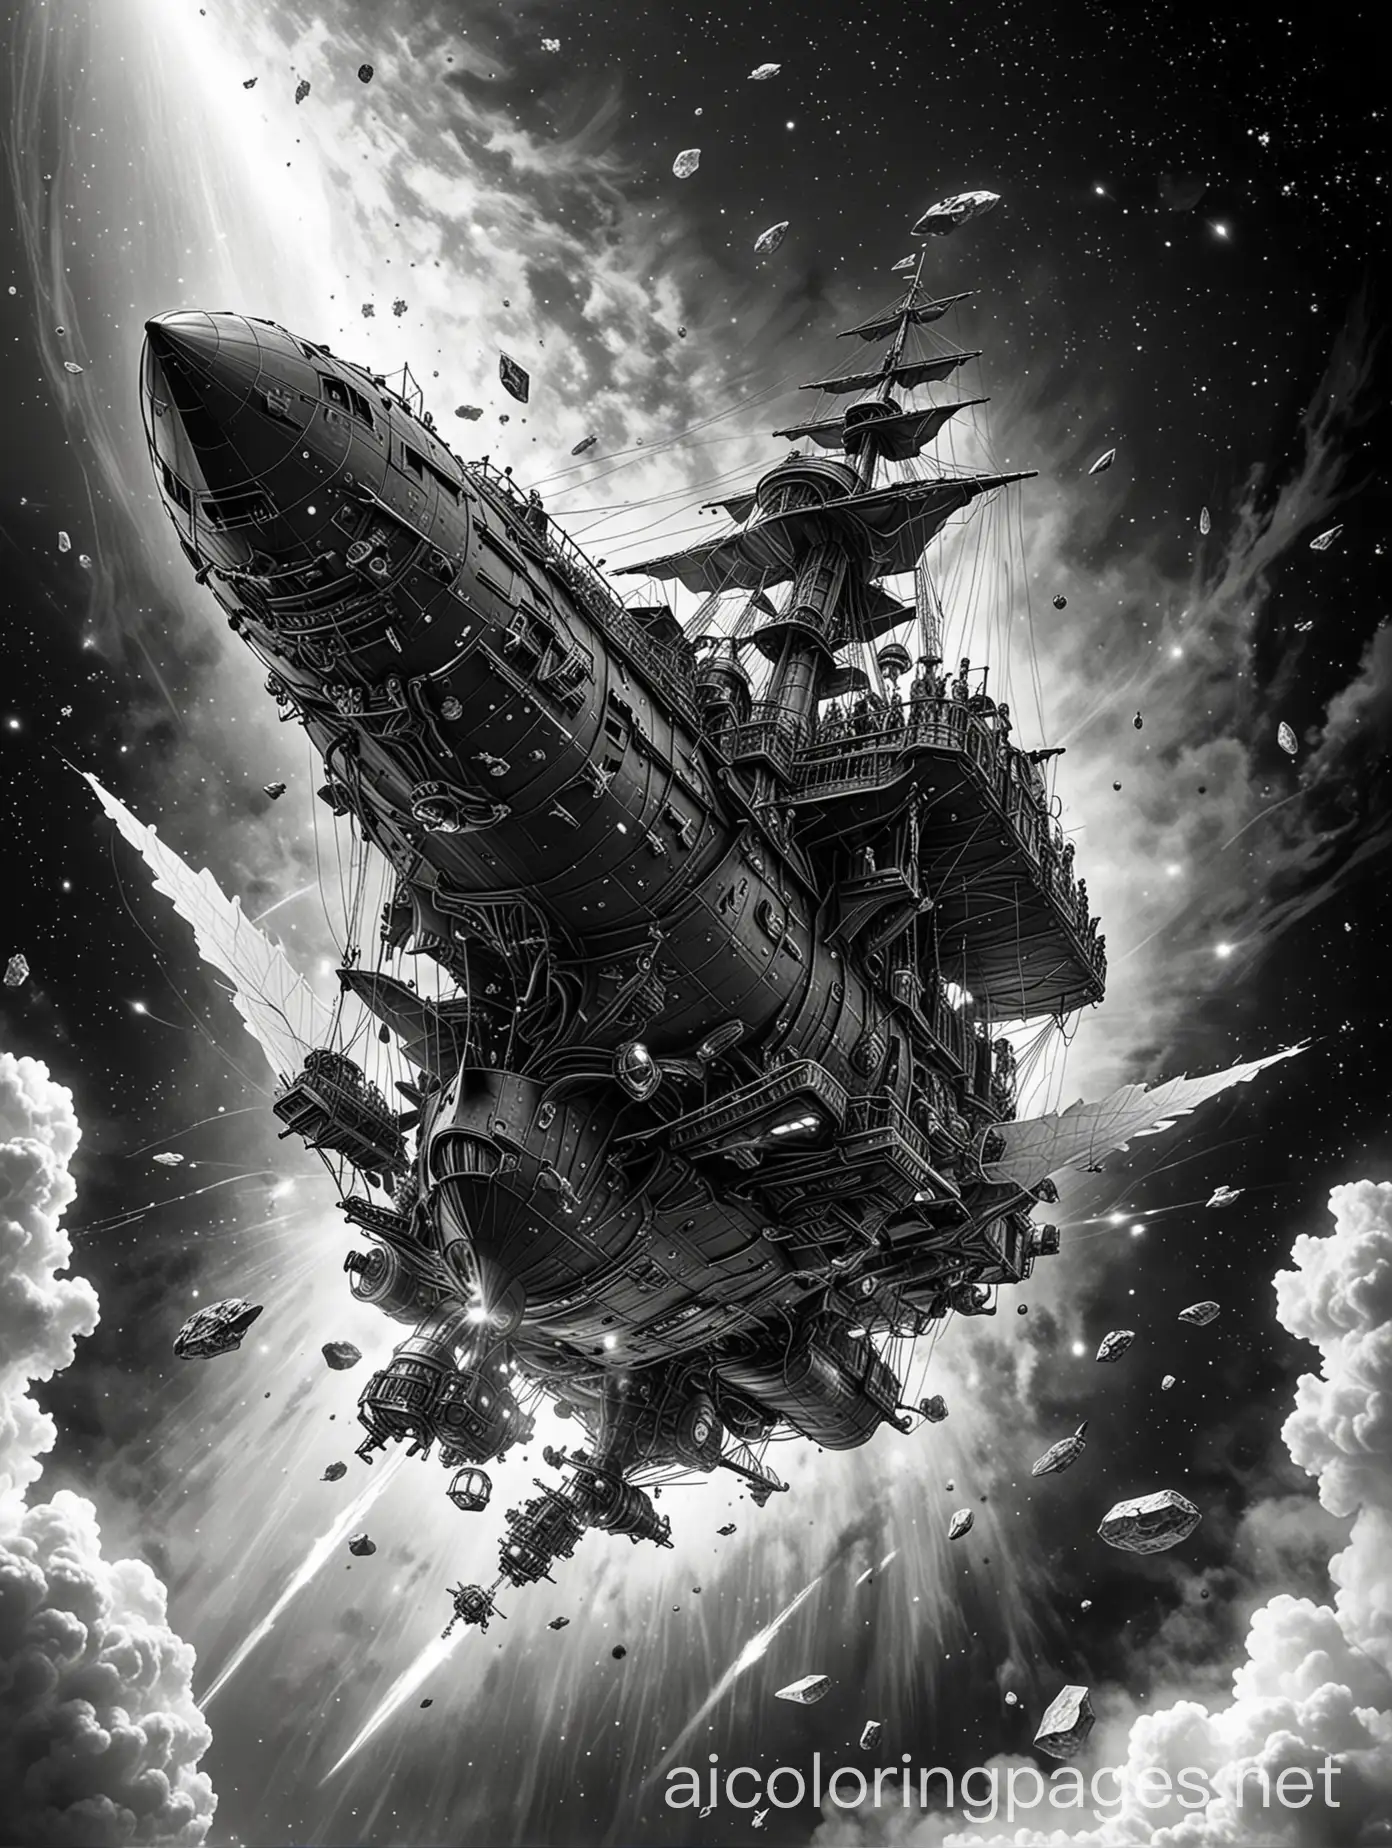 Galactic-Pirate-Ship-Flying-Through-Space-with-Steampunk-Airship-and-Fantasy-Creatures